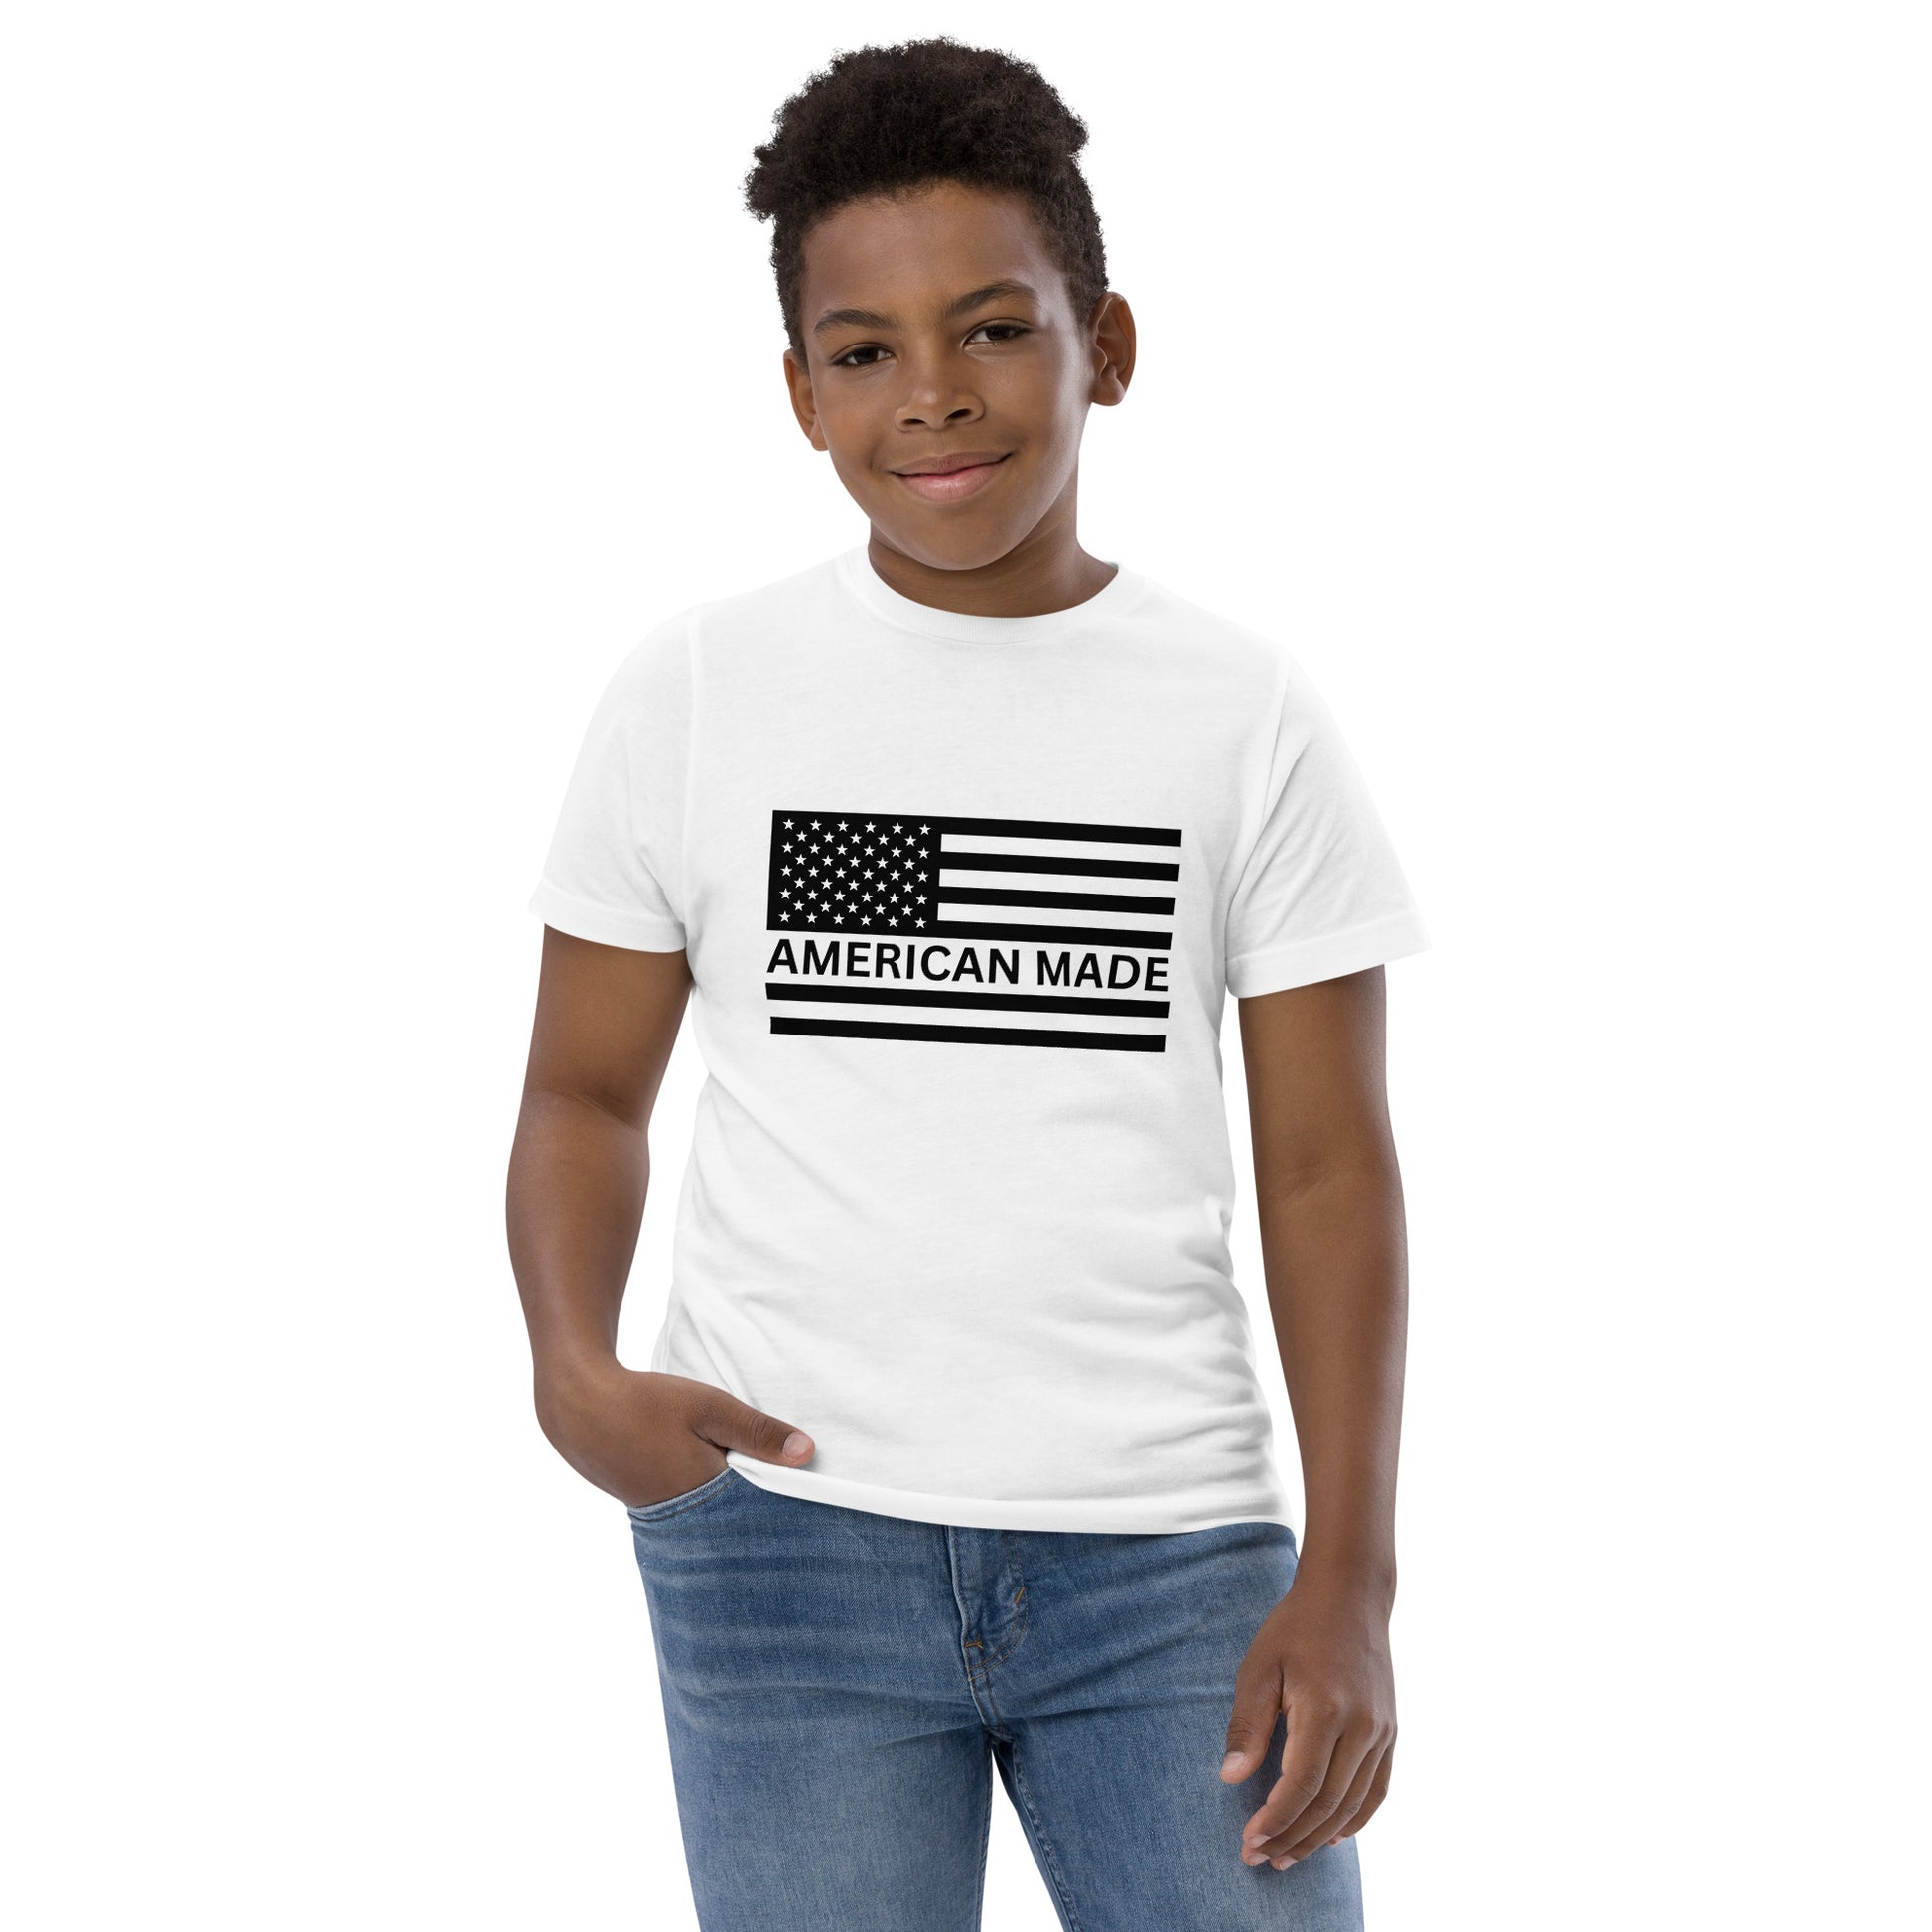 Let your young patriots show their love for America with our American Made Youth UNCIVIL Tee. This tee features a bold American flag graphic that will showcase your child's patriotism and support for American values.